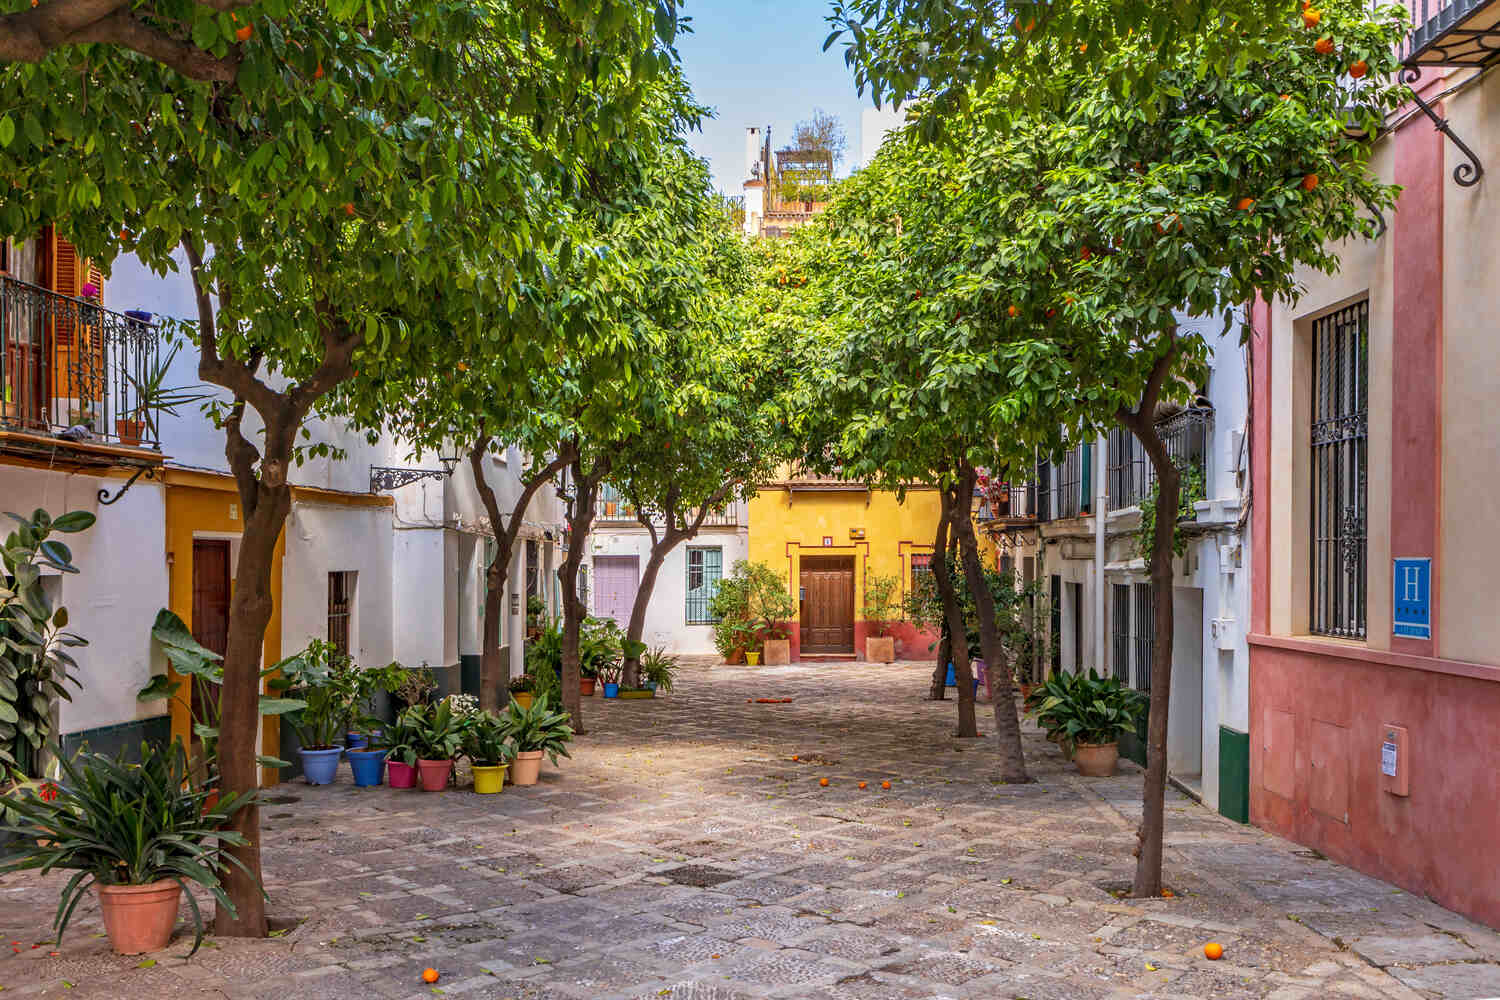 Santa Cruz area in Seville with trees and flowers